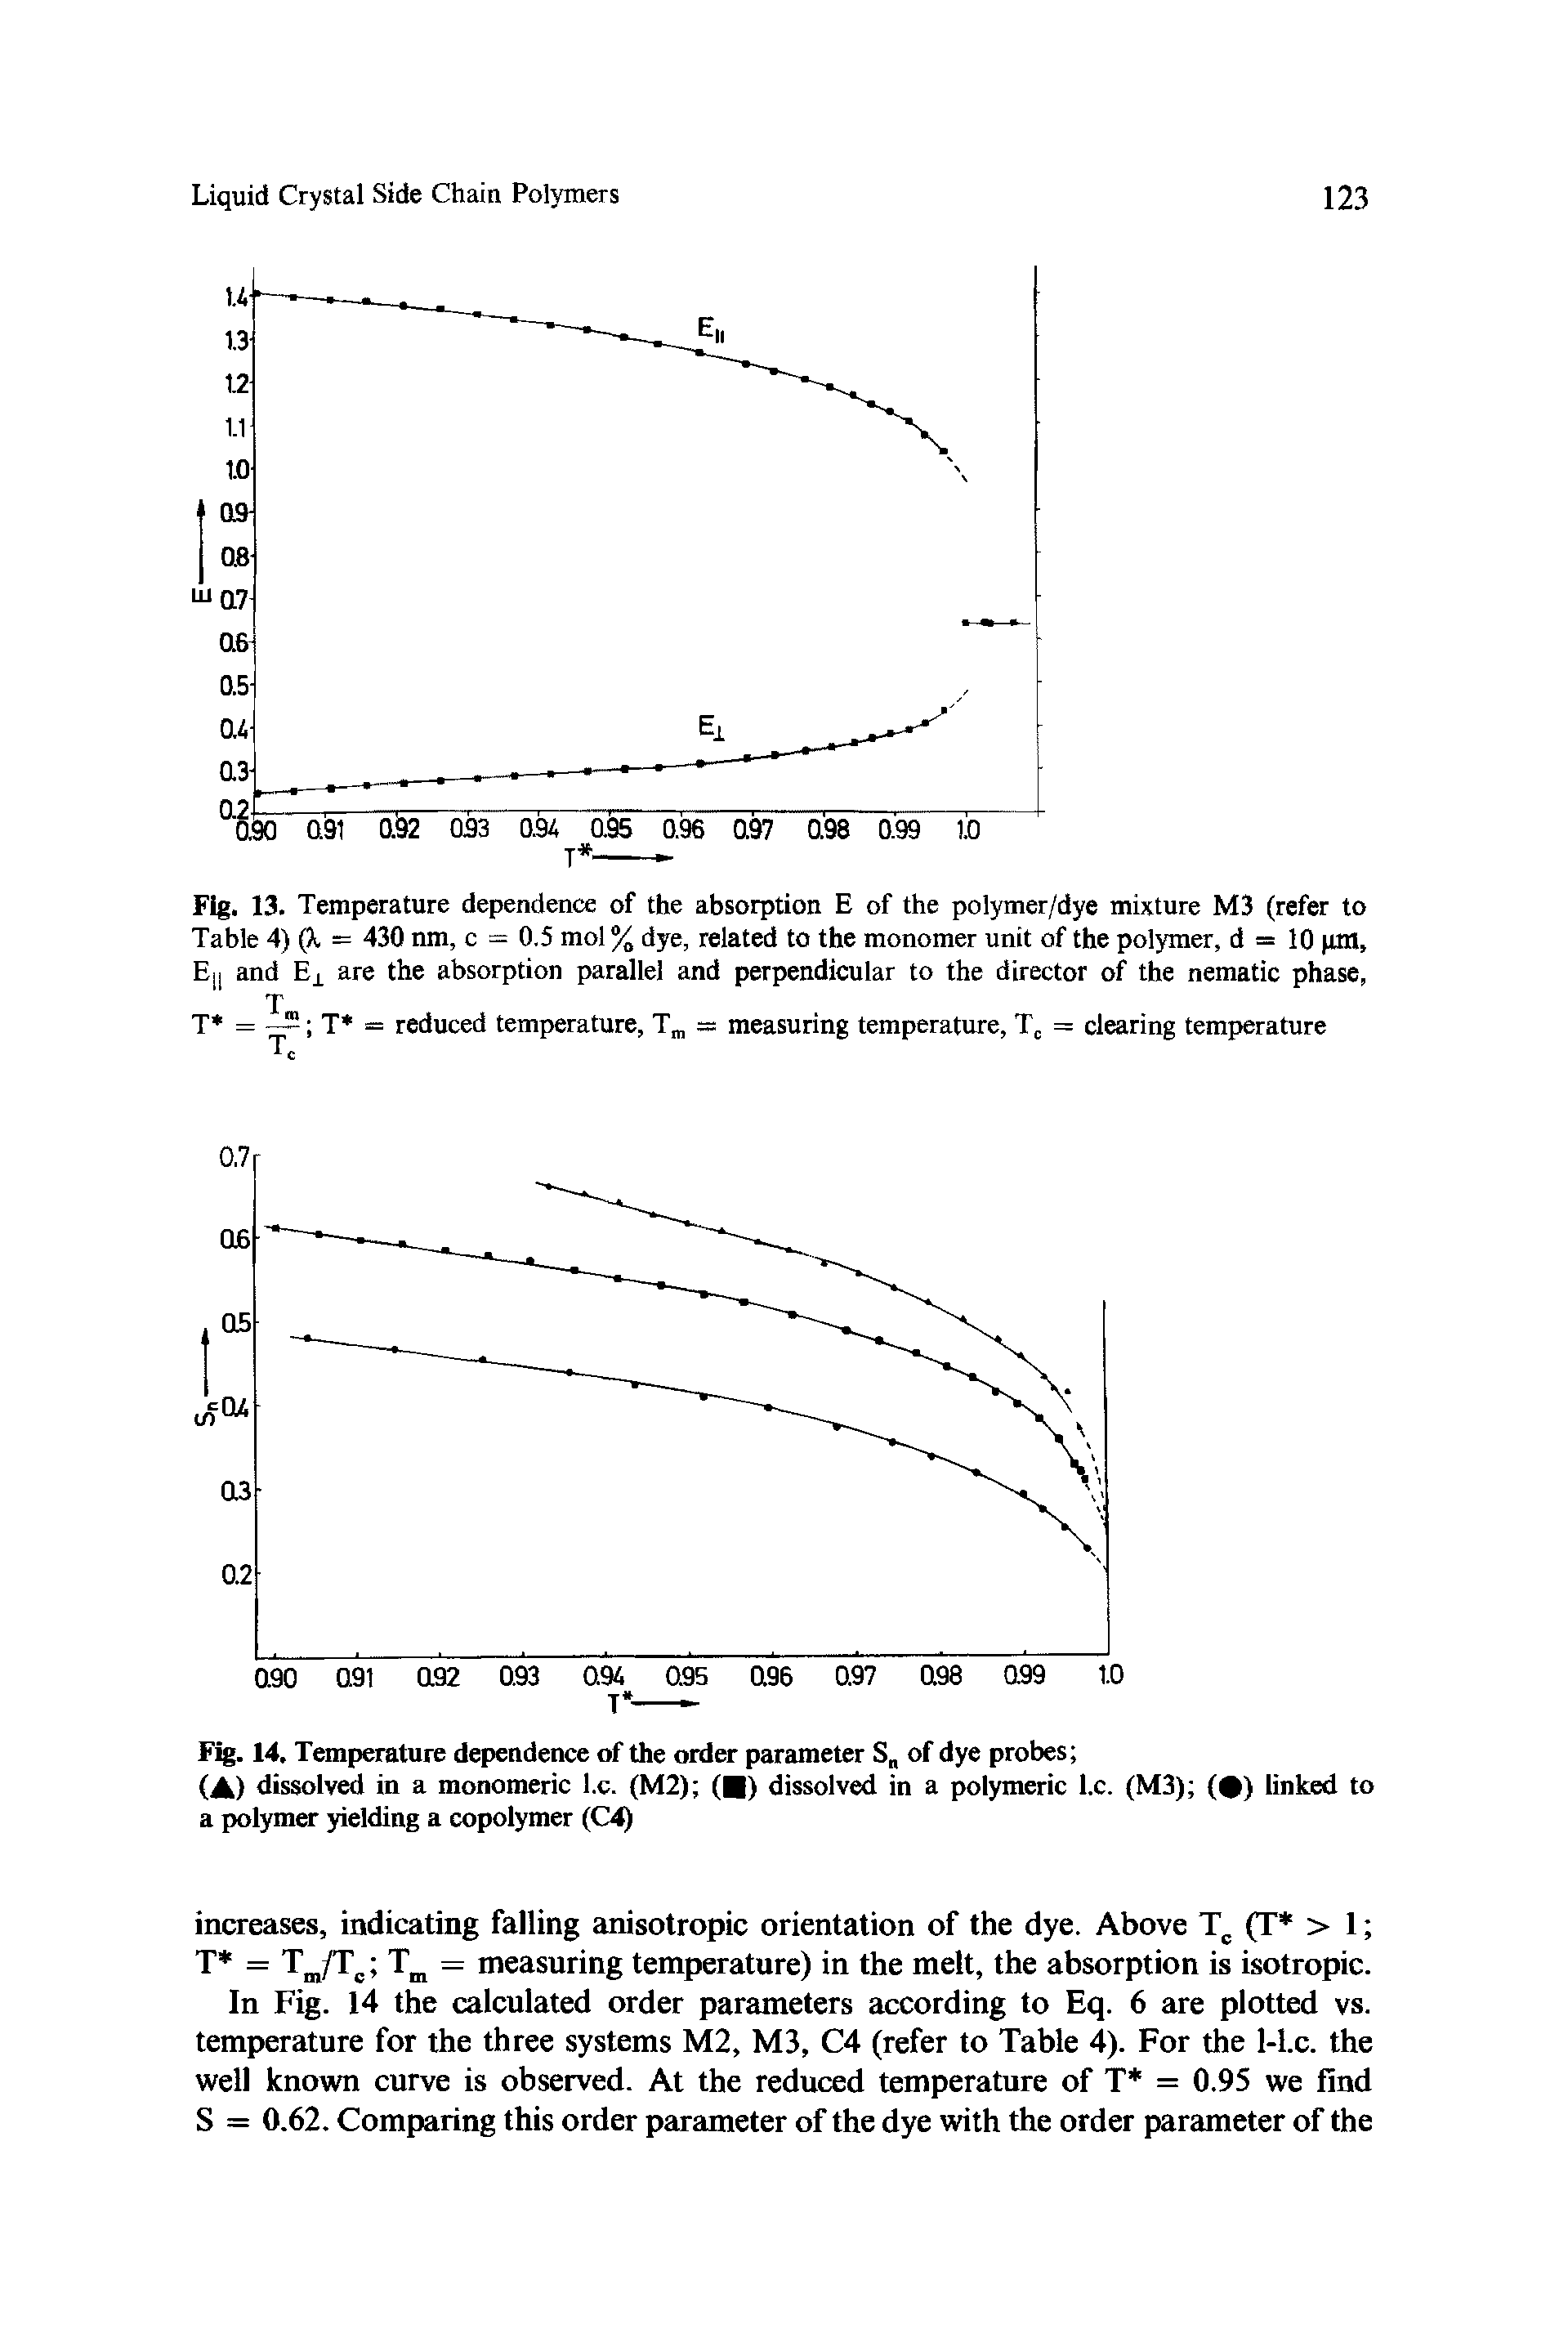 Fig. 13. Temperature dependence of the absorption E of the polymer/dye mixture M3 (refer to Table 4) (k = 430 nm, c = 0.5 mol % dye, related to the monomer unit of the polymer, d = 10 pm, E and E are the absorption parallel and perpendicular to the director of the nematic phase,...